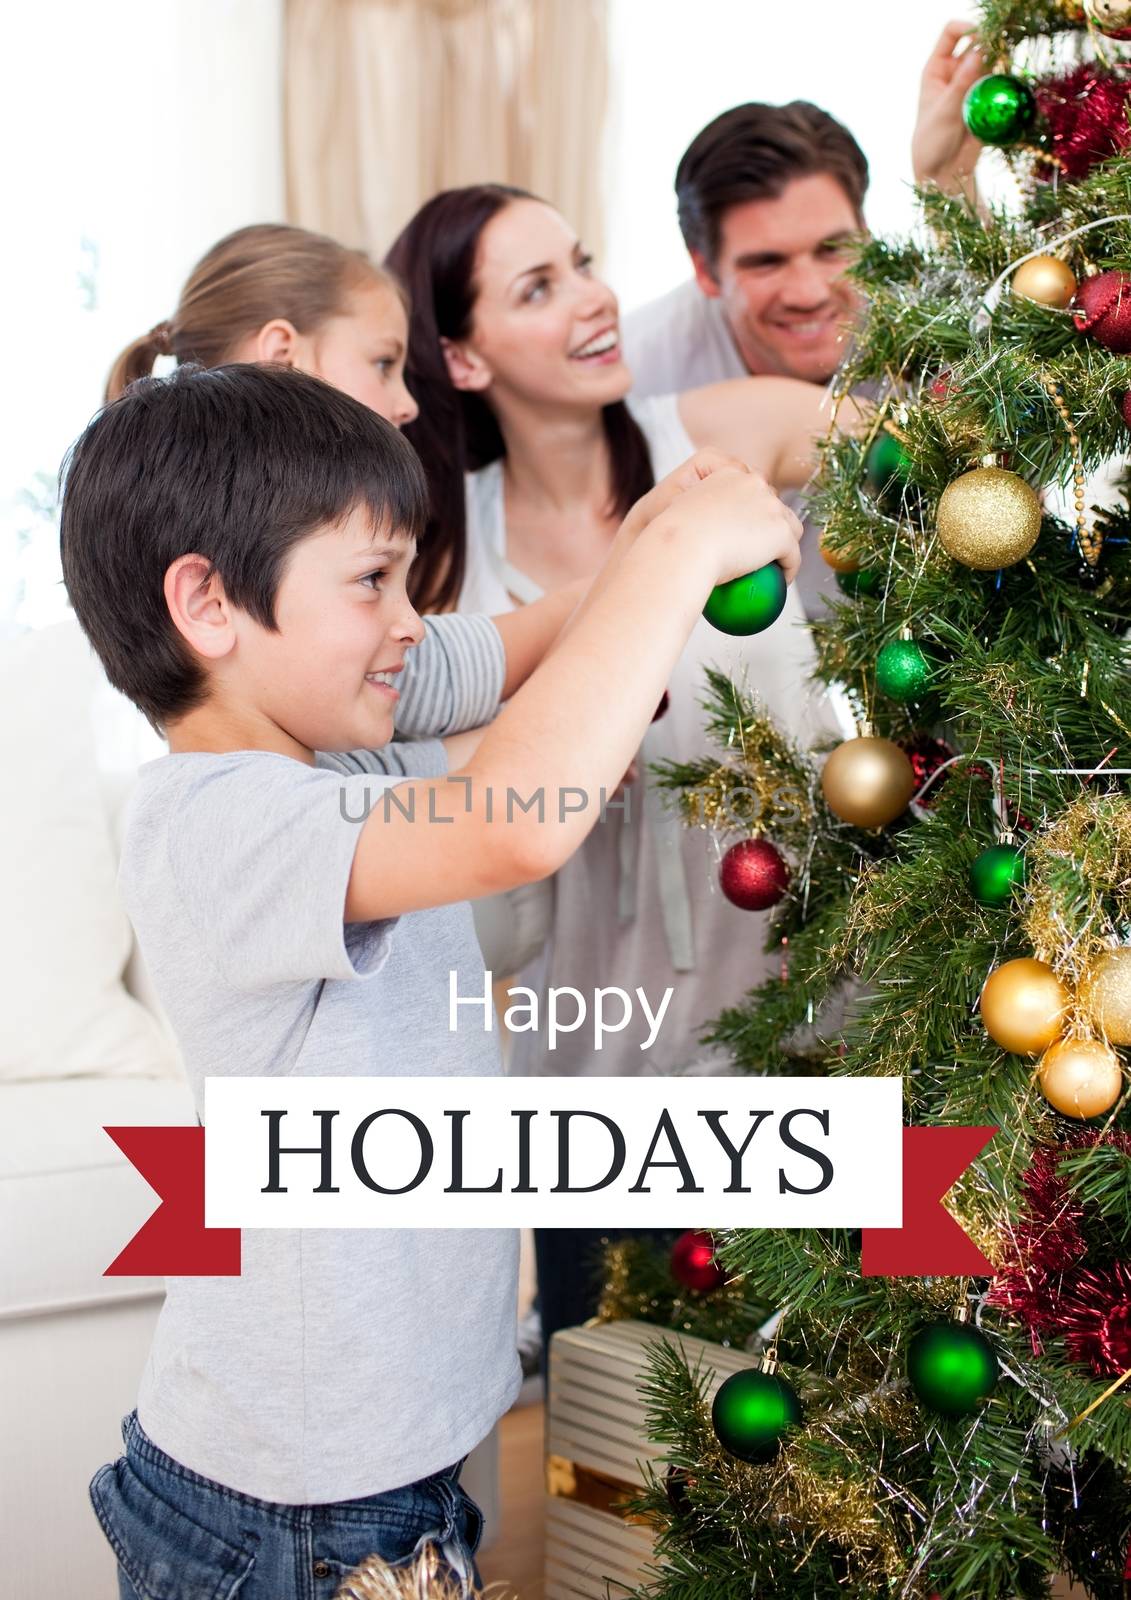 Digital composite of Happy Holidays text with family decorating tree